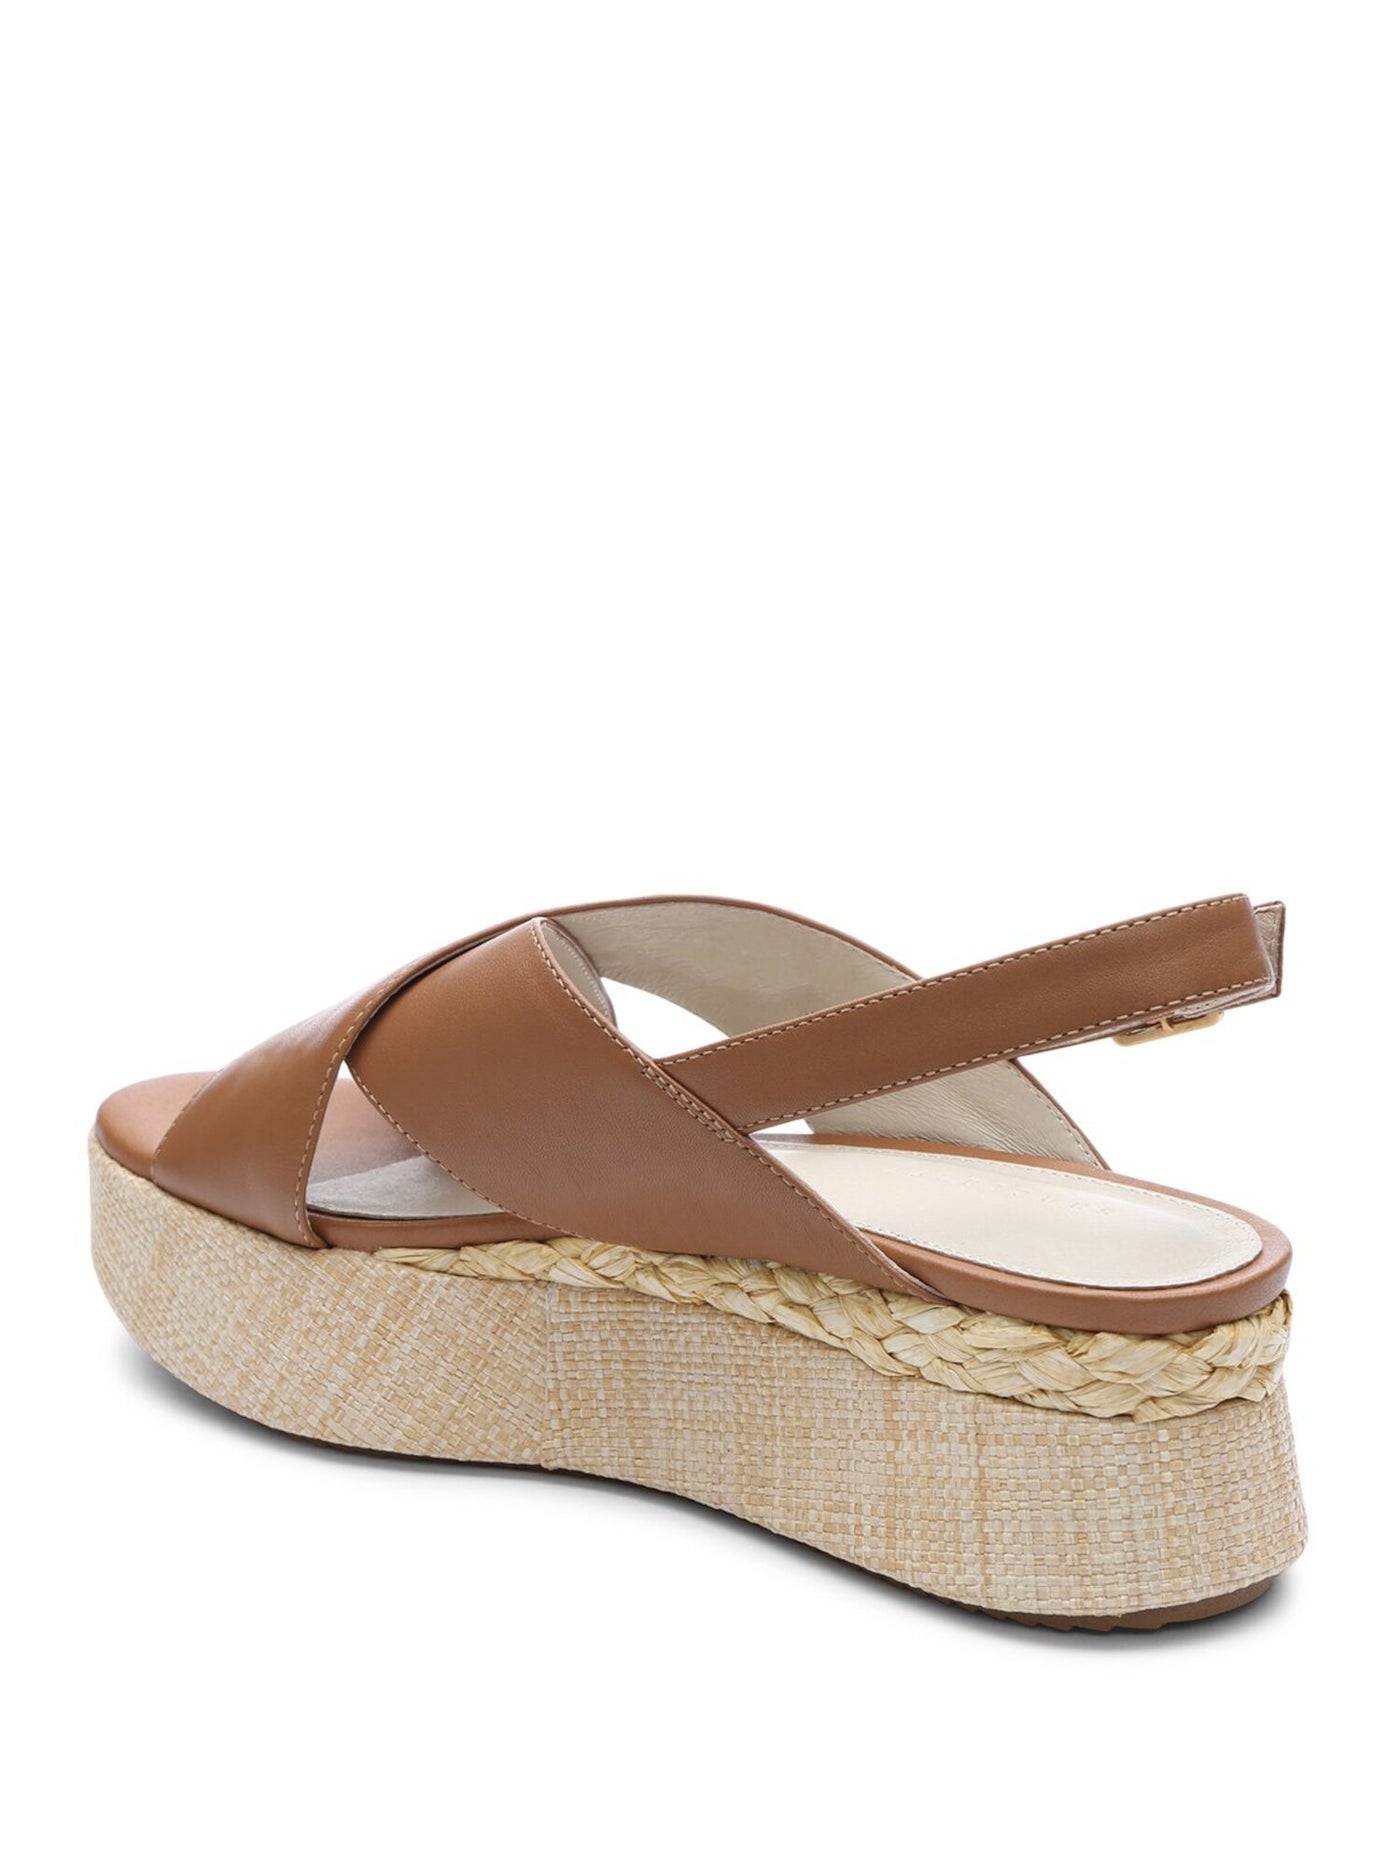 SANCTUARY Womens Beige 1-1/2" Platform Woven Crisscross Straps Adjustable Strap Cushioned All Smiles Round Toe Wedge Buckle Leather Espadrille Shoes 9.5